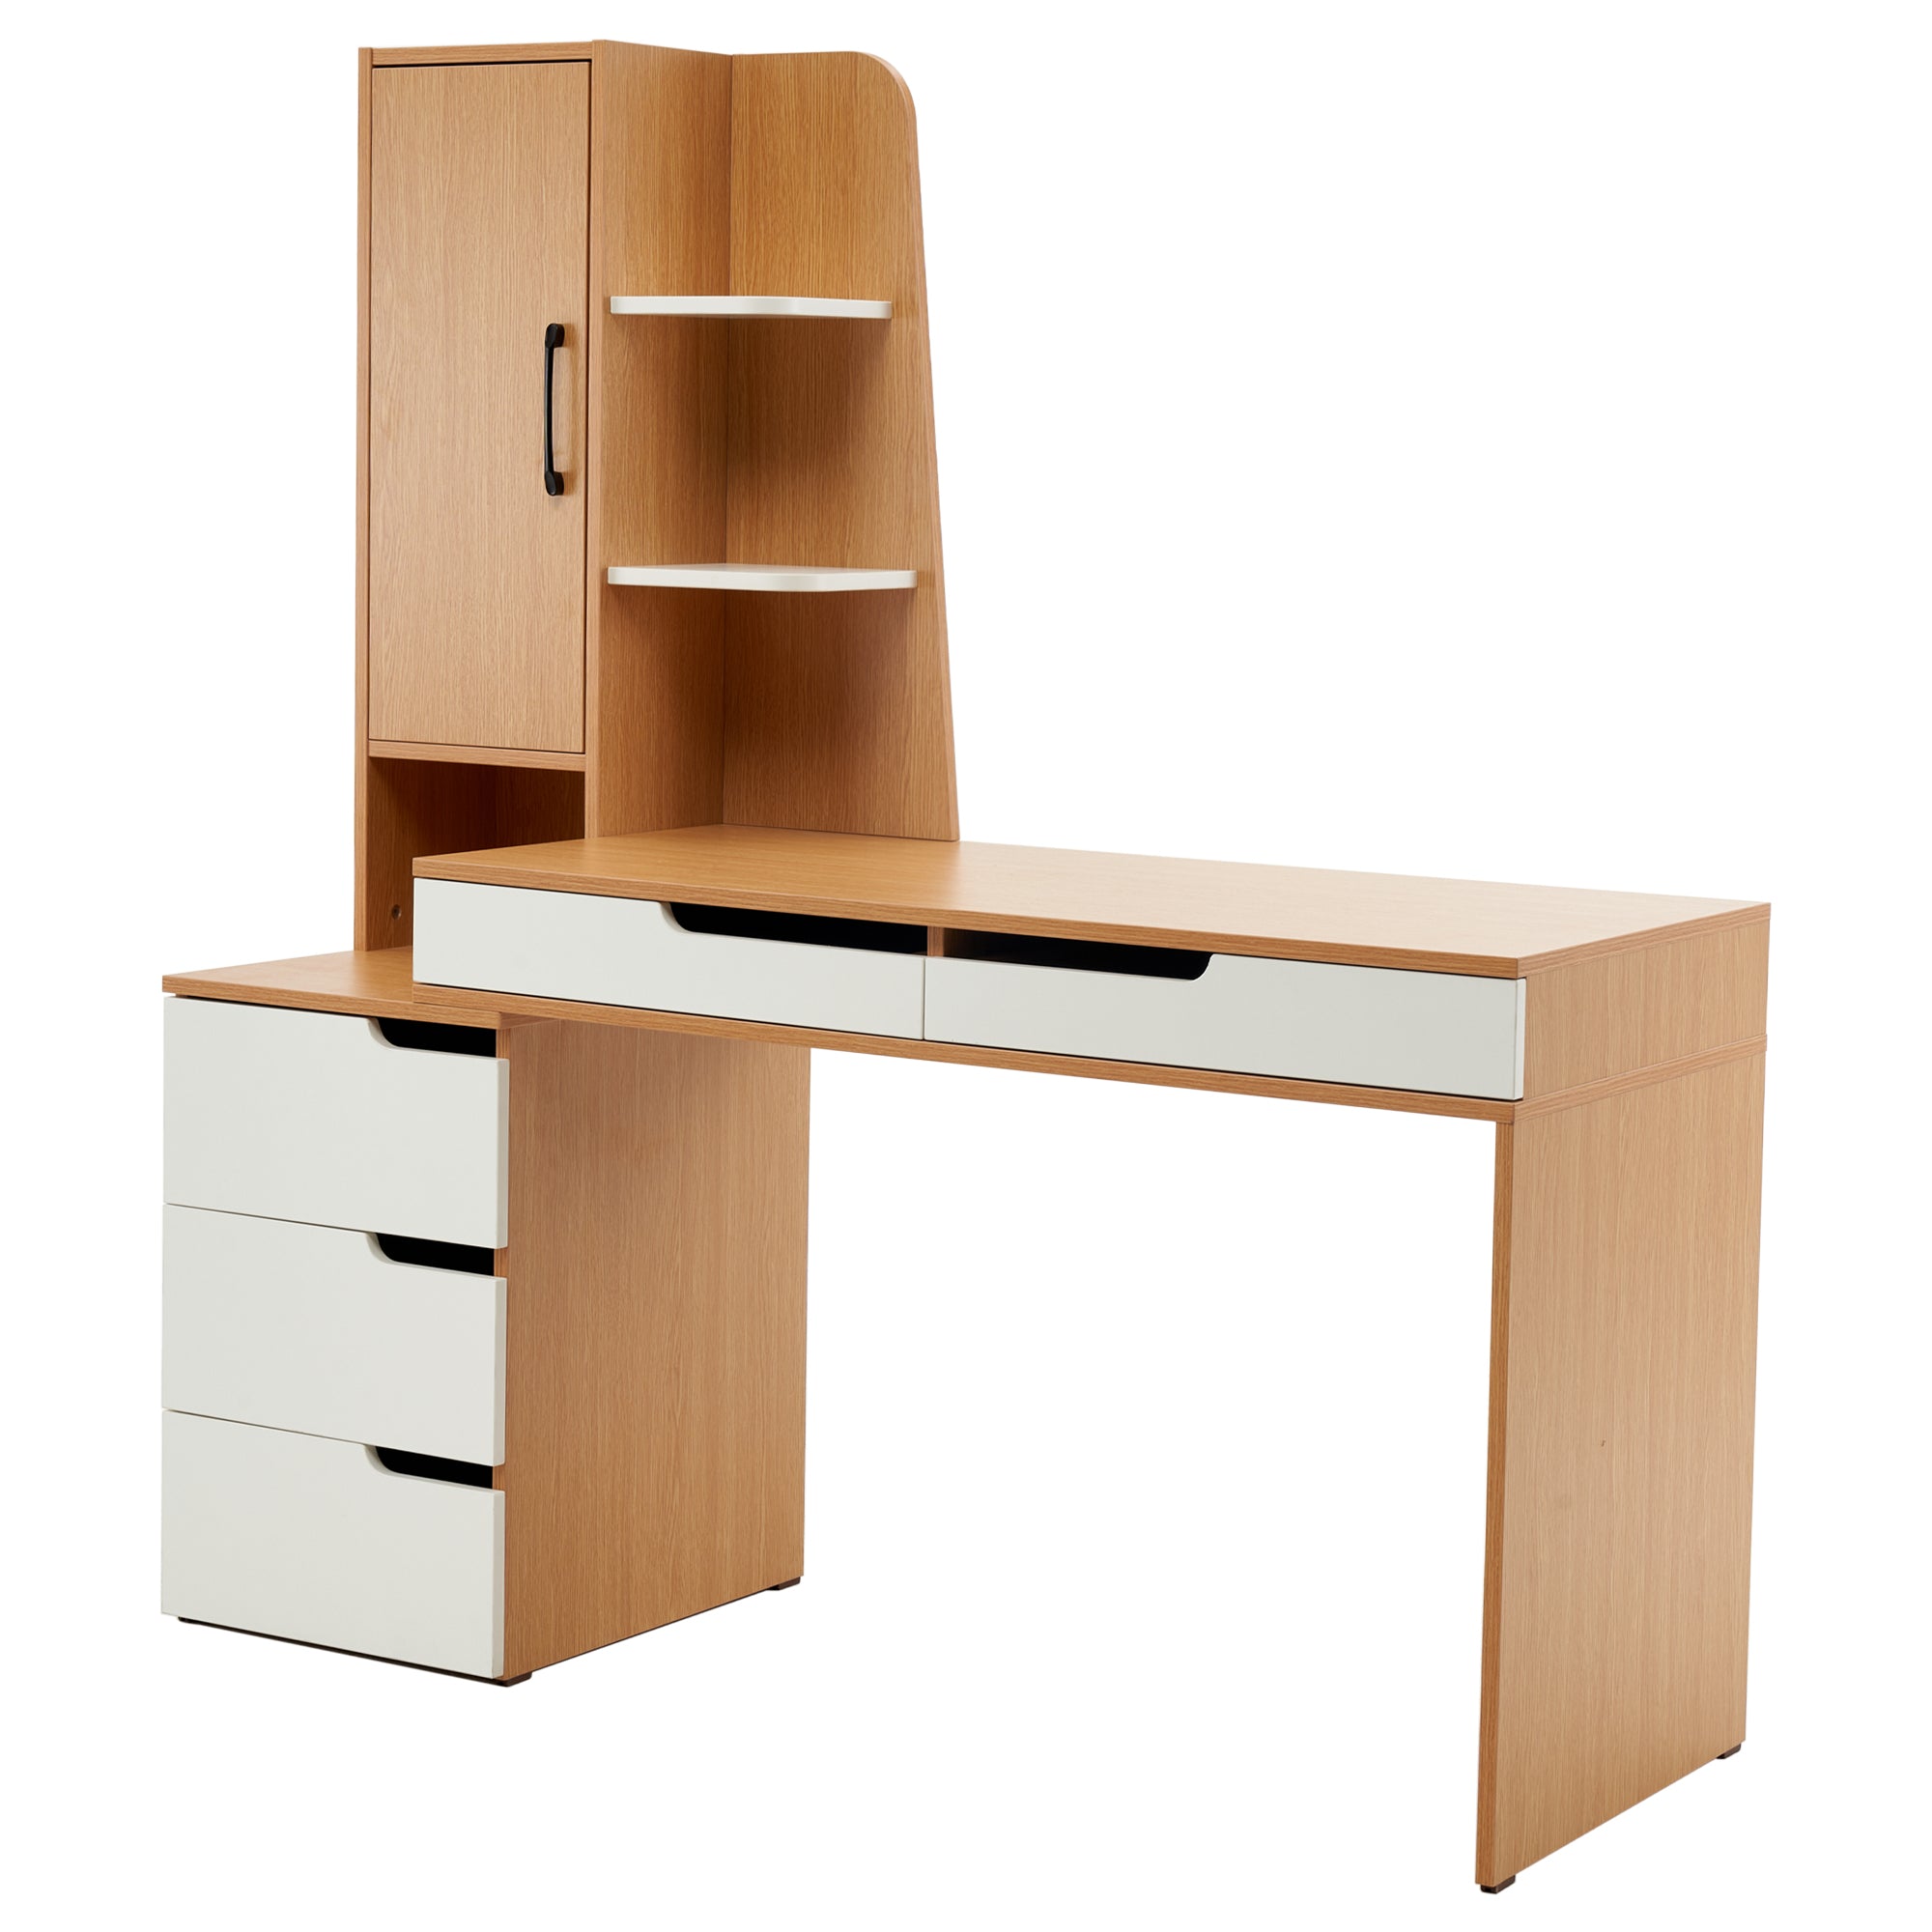 Ivinta Computer Desk with Drawers Storage Shelves, Modern Study Writing Table with Storage Cabinet for Home Office